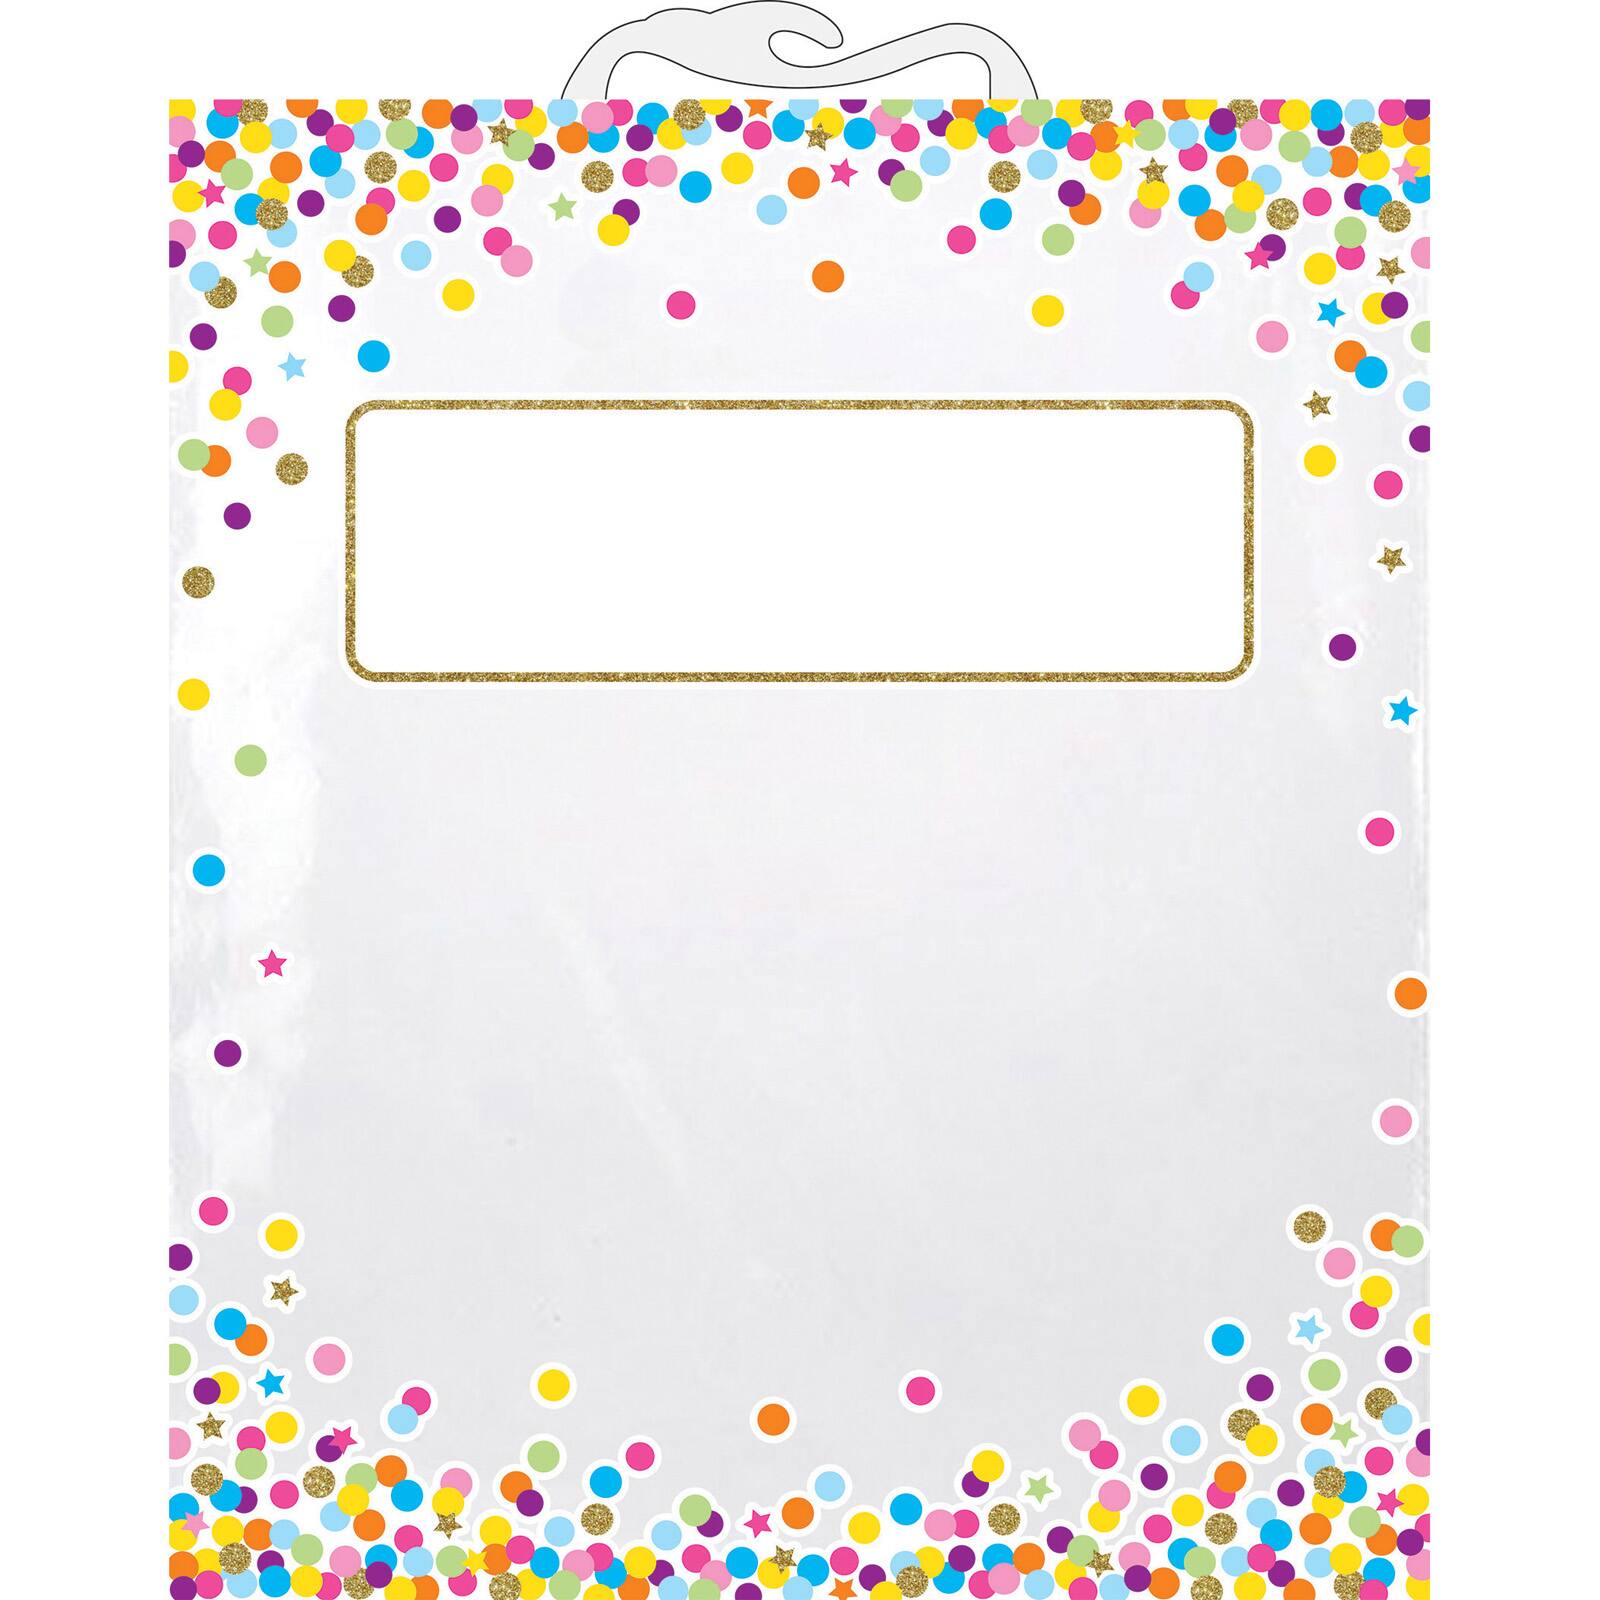 Buy the Ashley Productions 10.5" x 12.5" Hanging Confetti Pattern Storage Bag, 10ct. at Michaels.com